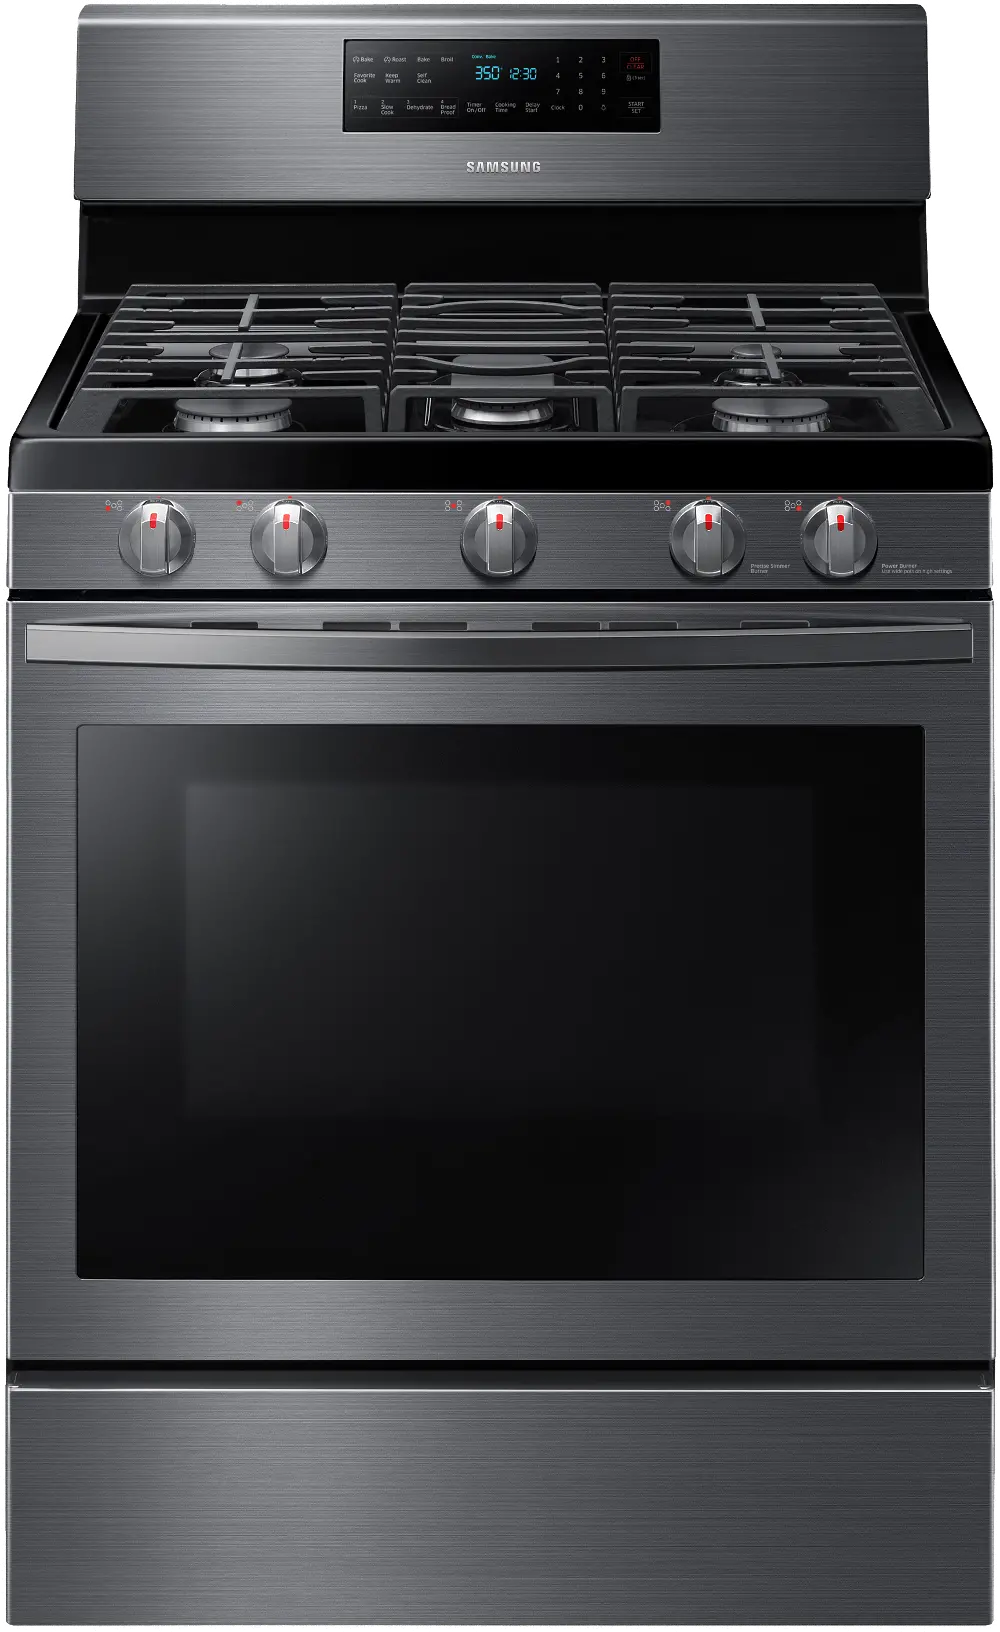 NX58T7511SG Samsung 30 Inch Gas Convection Range with Air Fry - 5.8 cu. ft., Black Stainless Steel-1